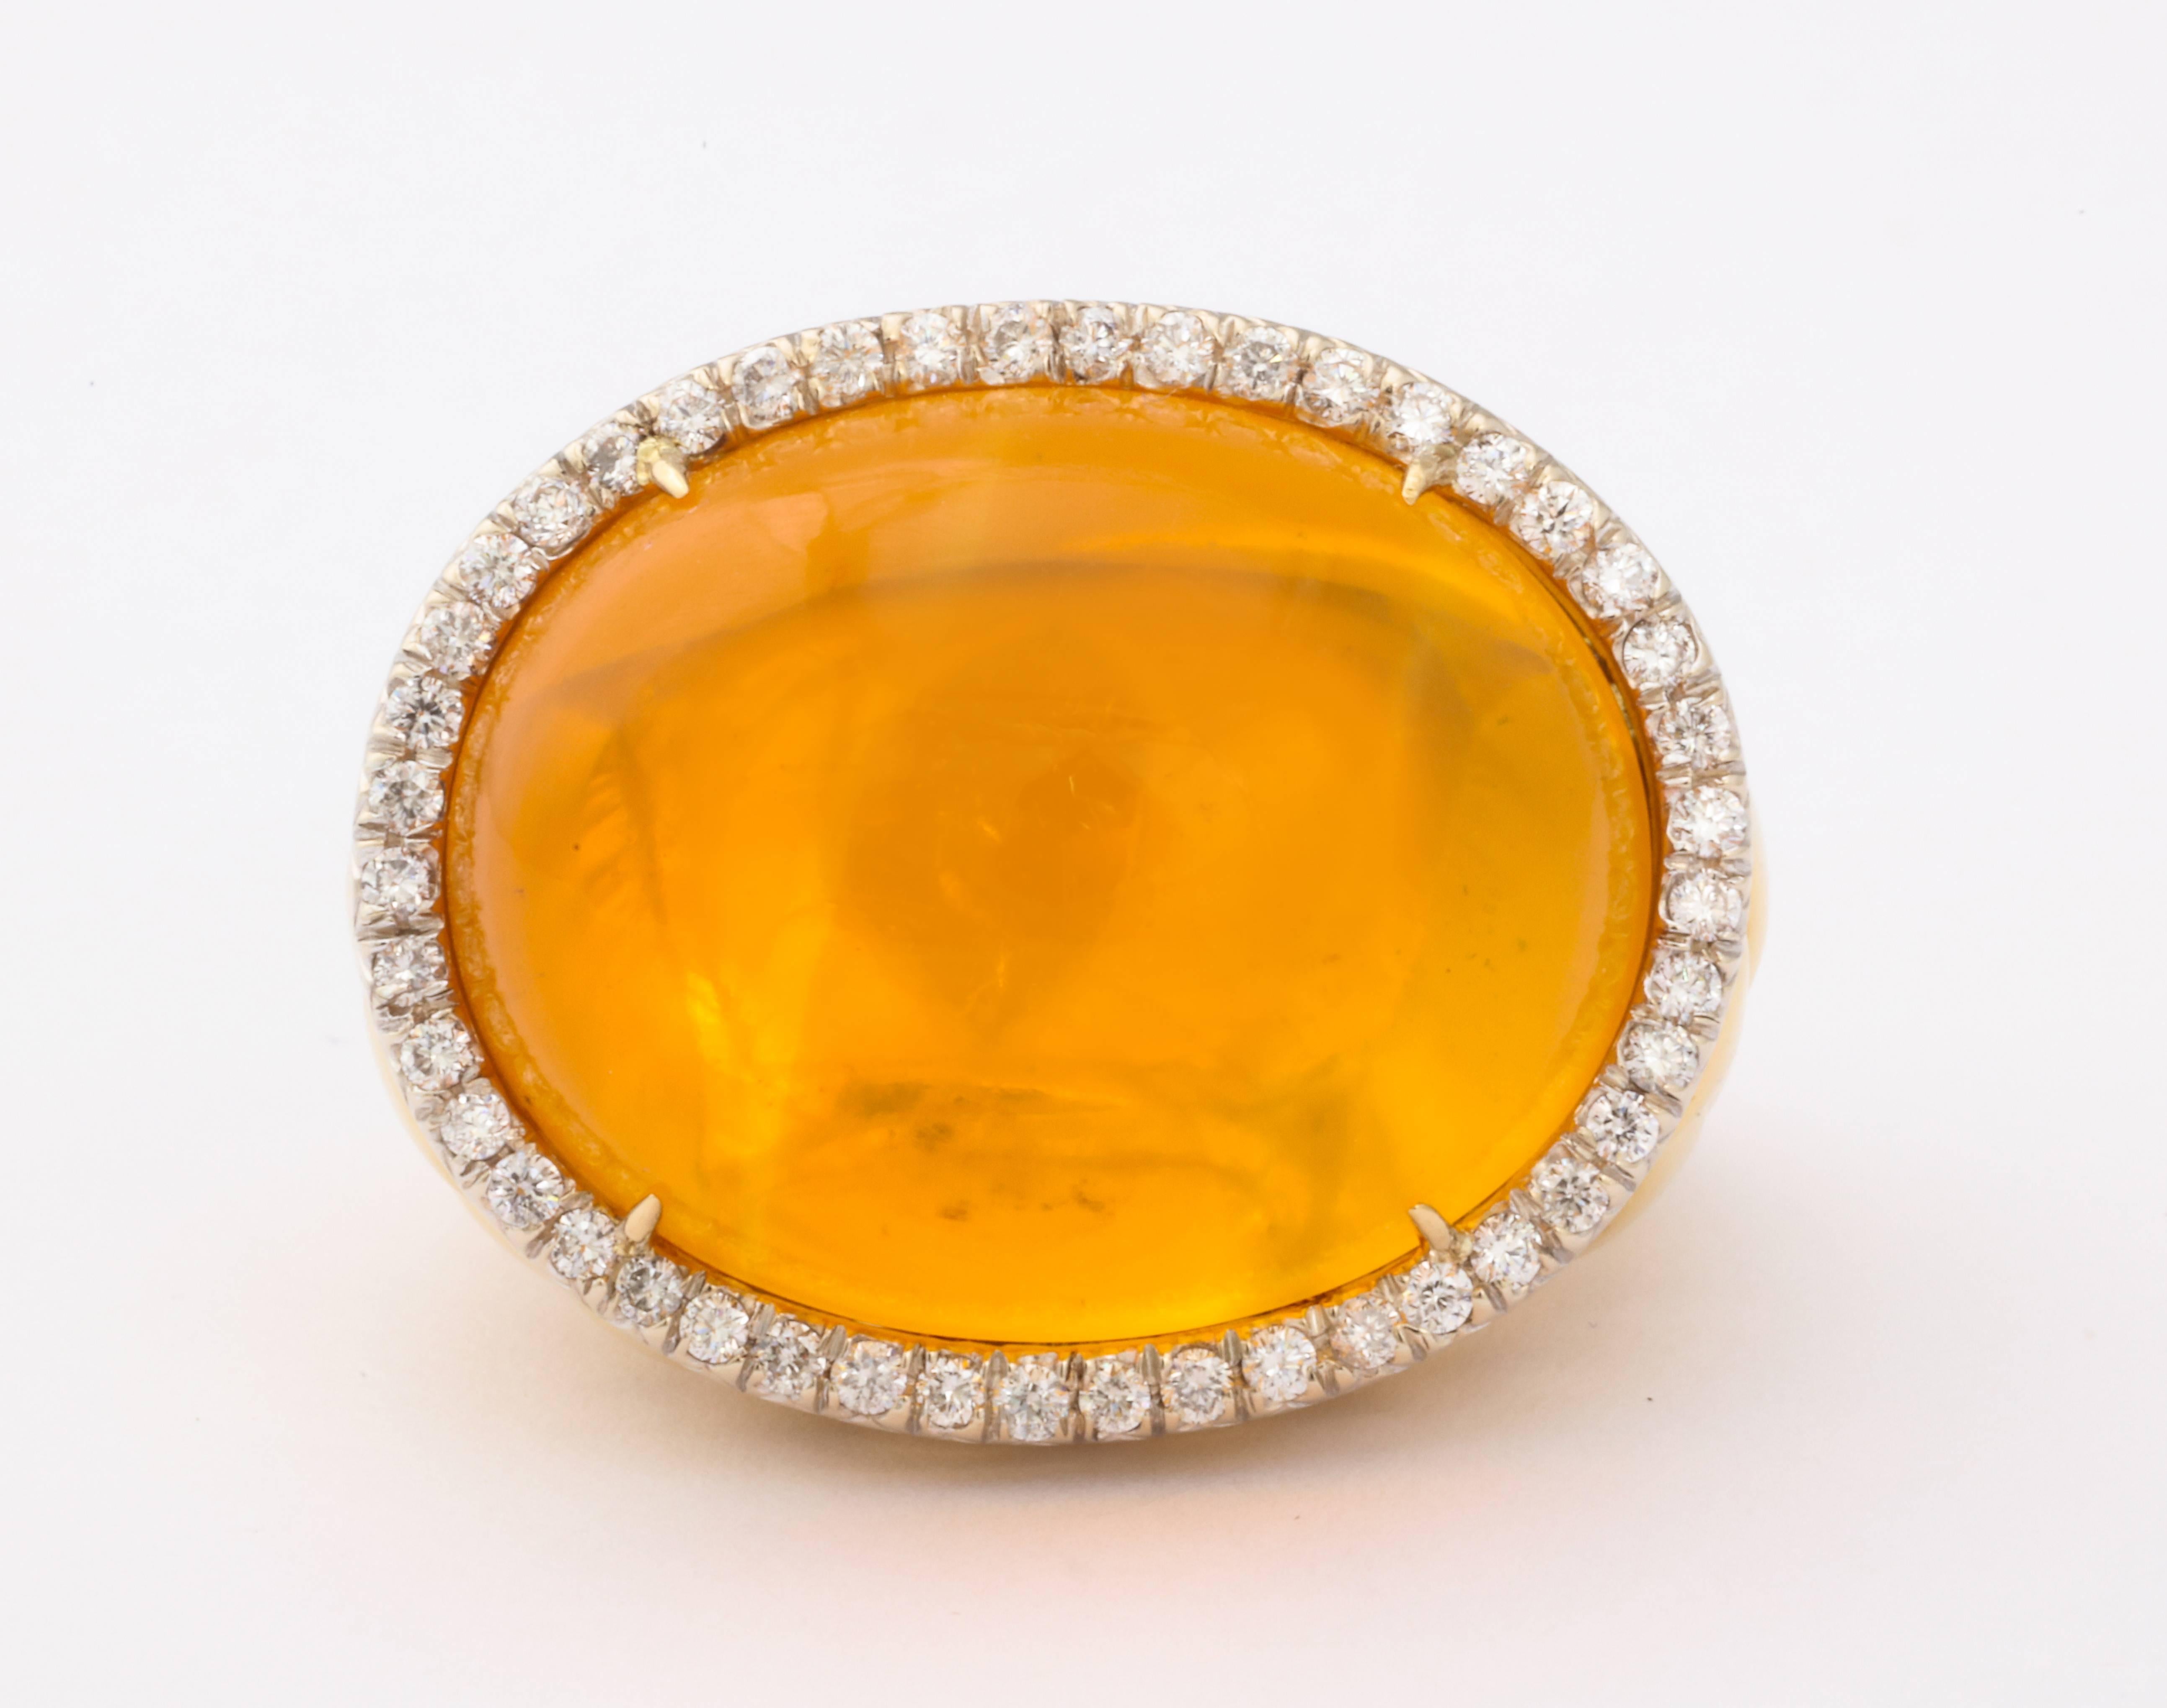 18kt yellow gold fire opal and white diamonds ring.
Current size 9, but can be sized down for customer. 